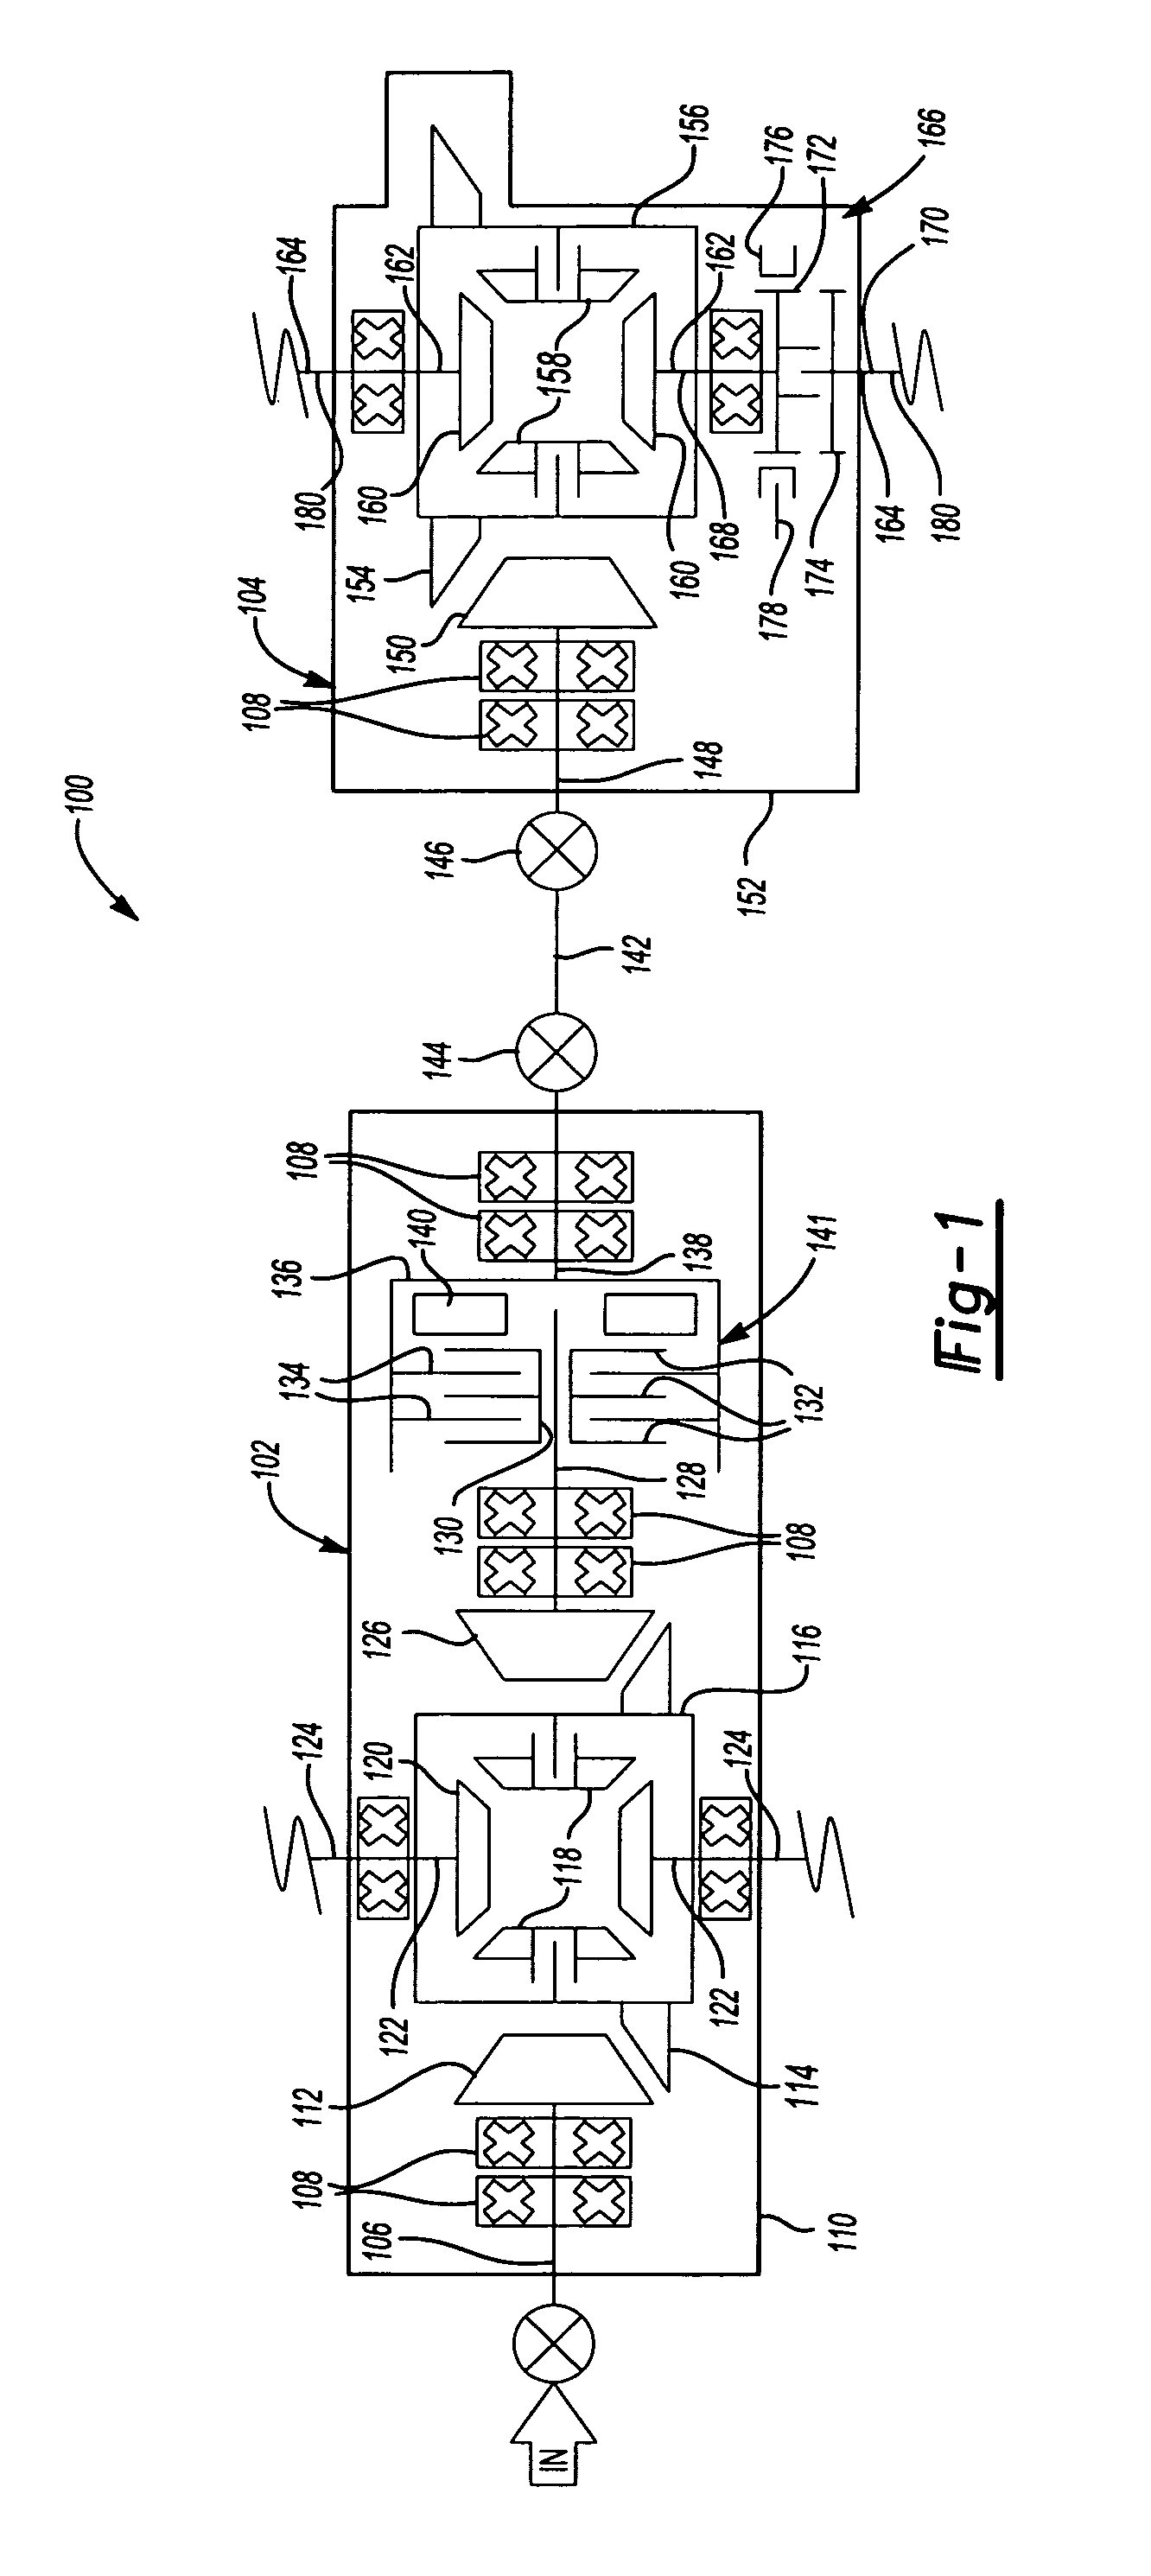 Drive axle system having a clutching device